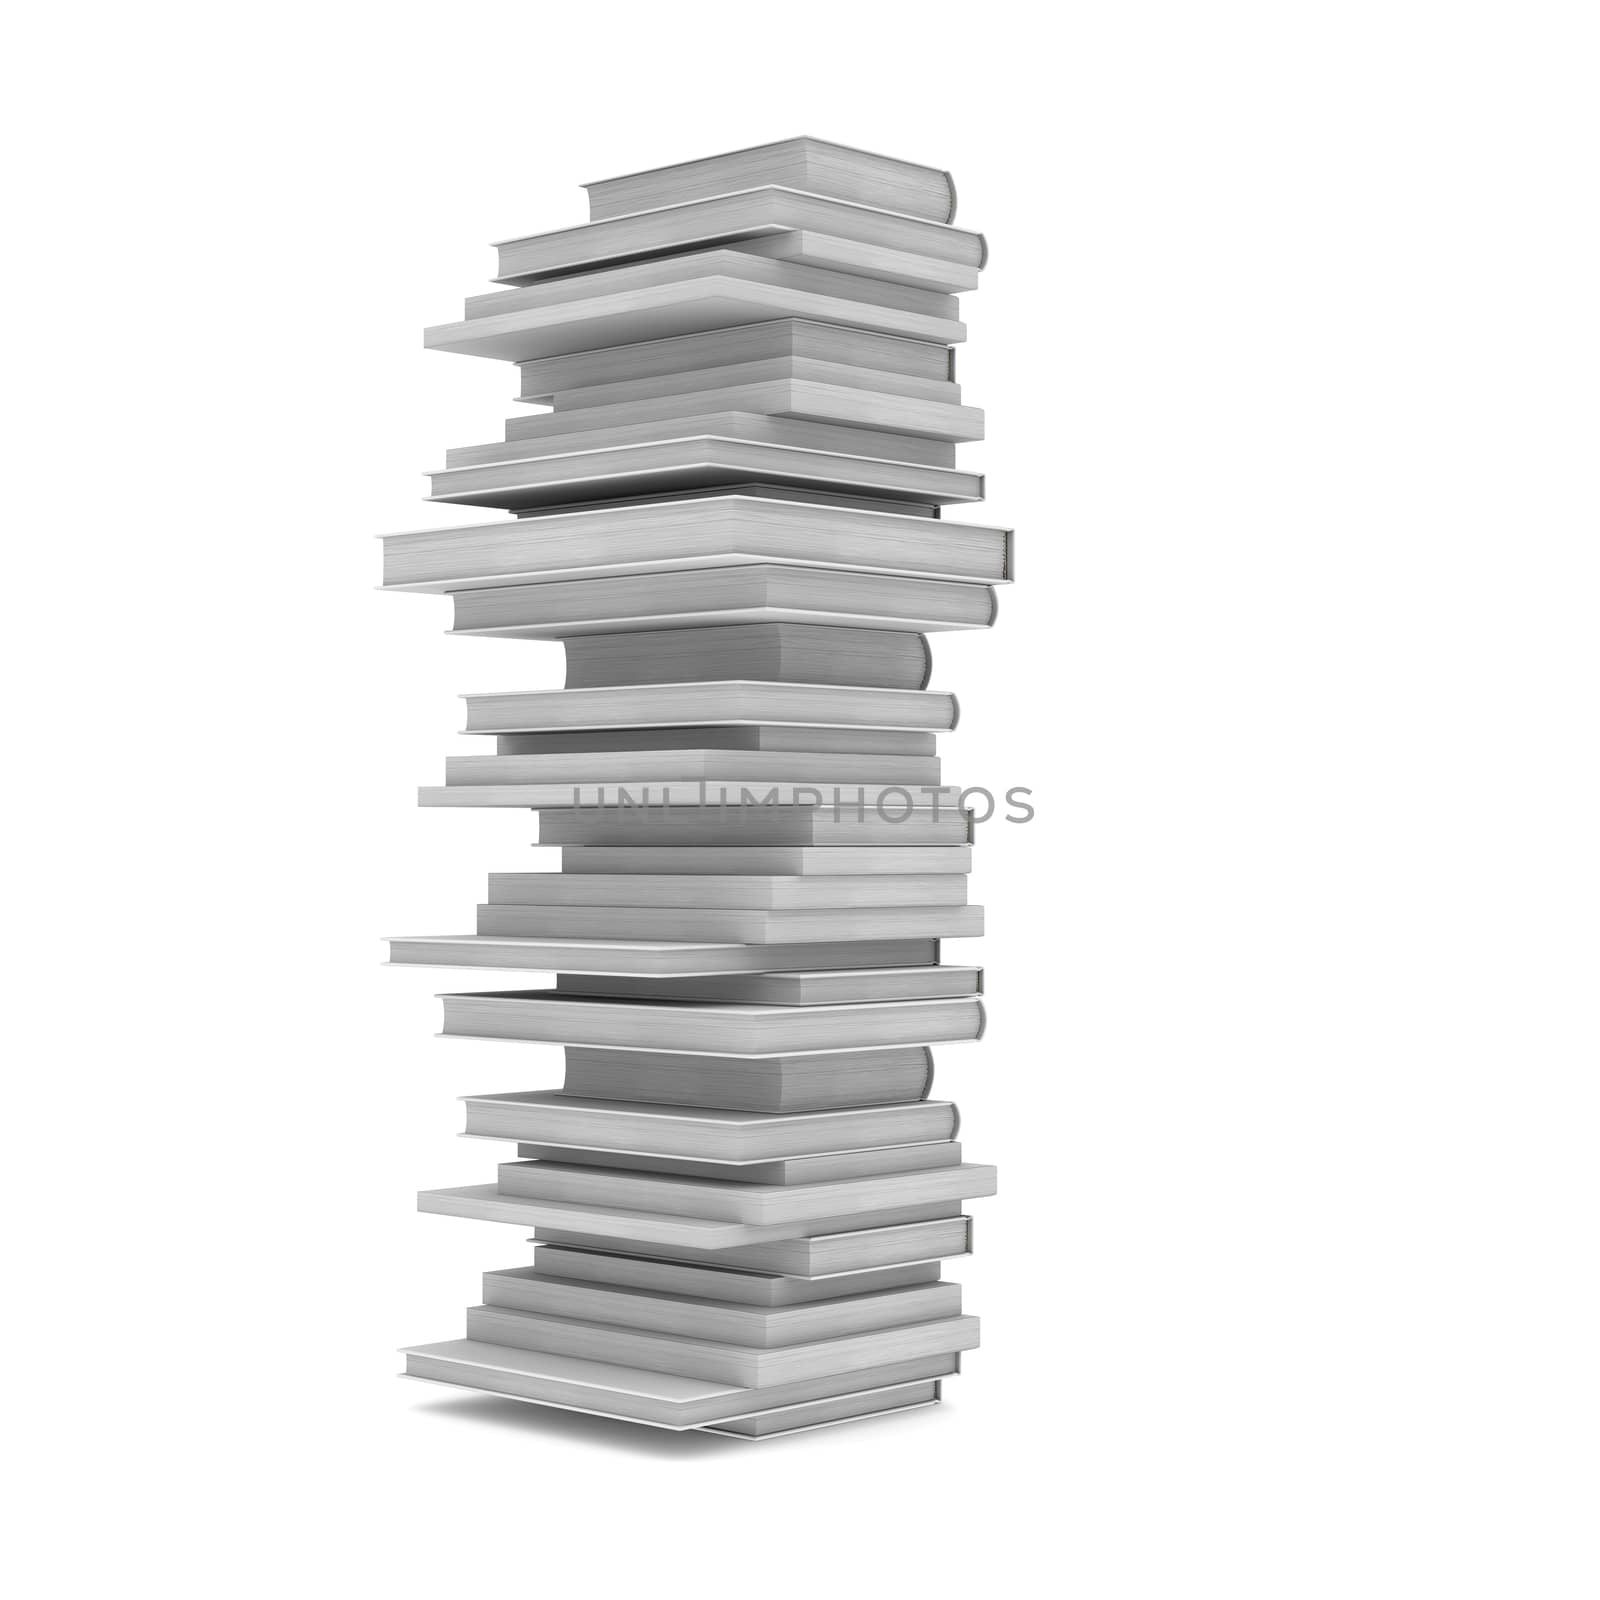 A stack of books by cherezoff